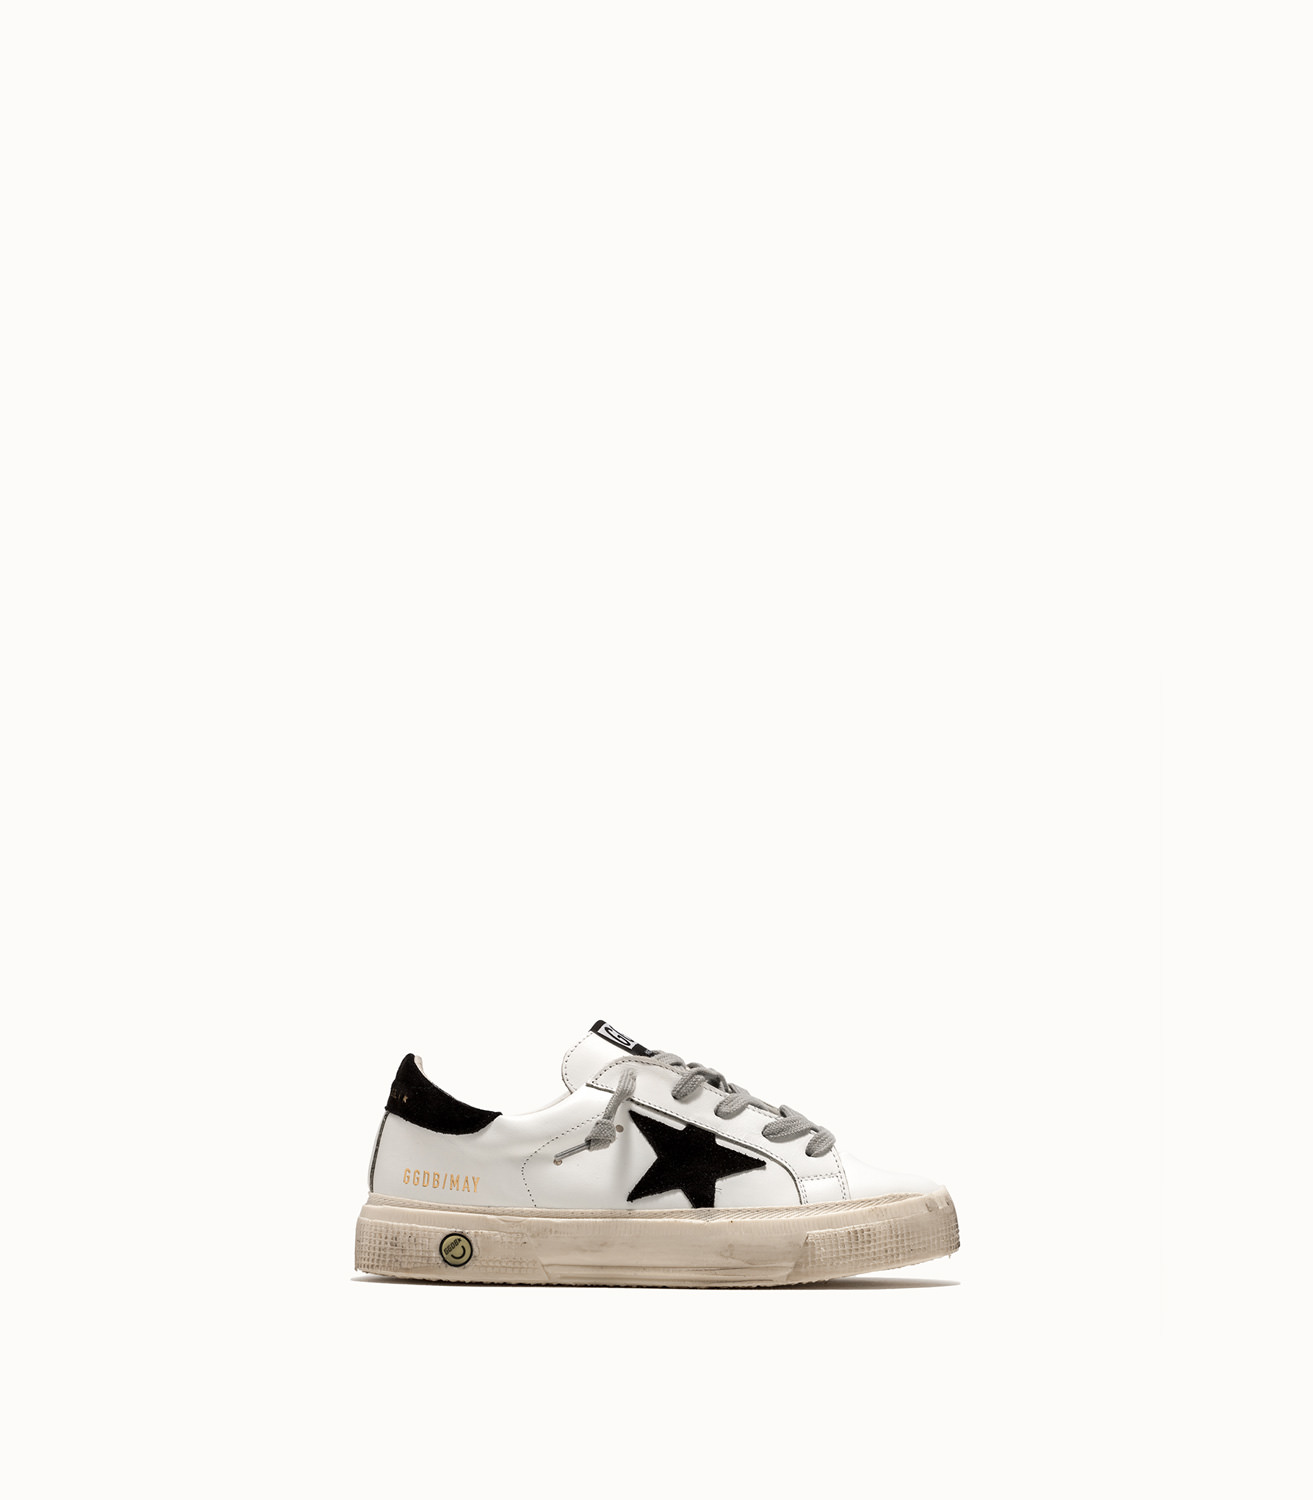 GOLDEN GOOSE DELUXE BRAND GOLDEN GOOSE MAY LEATHER COLOR WHITE | Pla